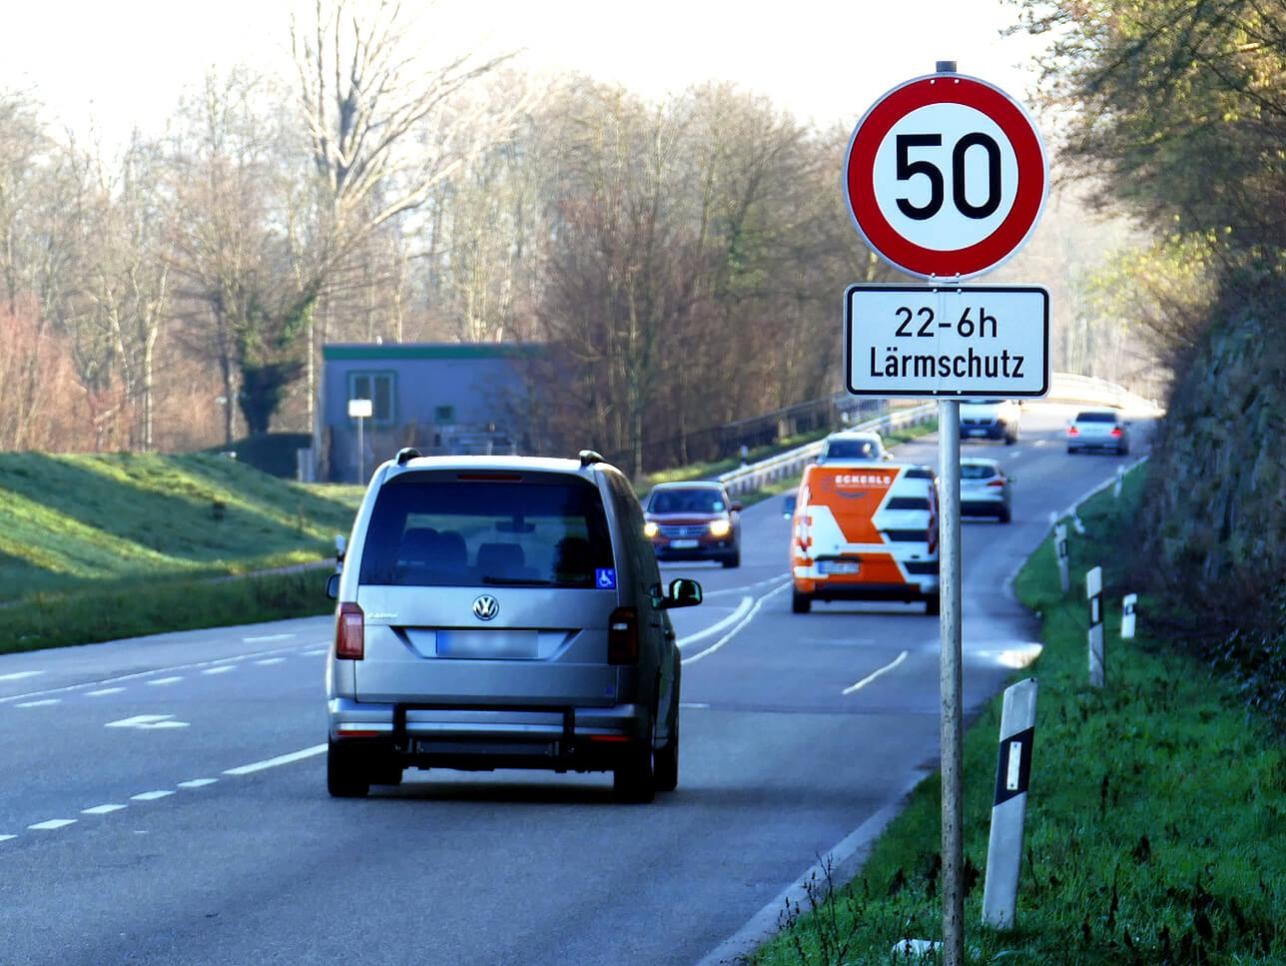 Street in Rastatt with cars, speed limit 50 and noise protection sign